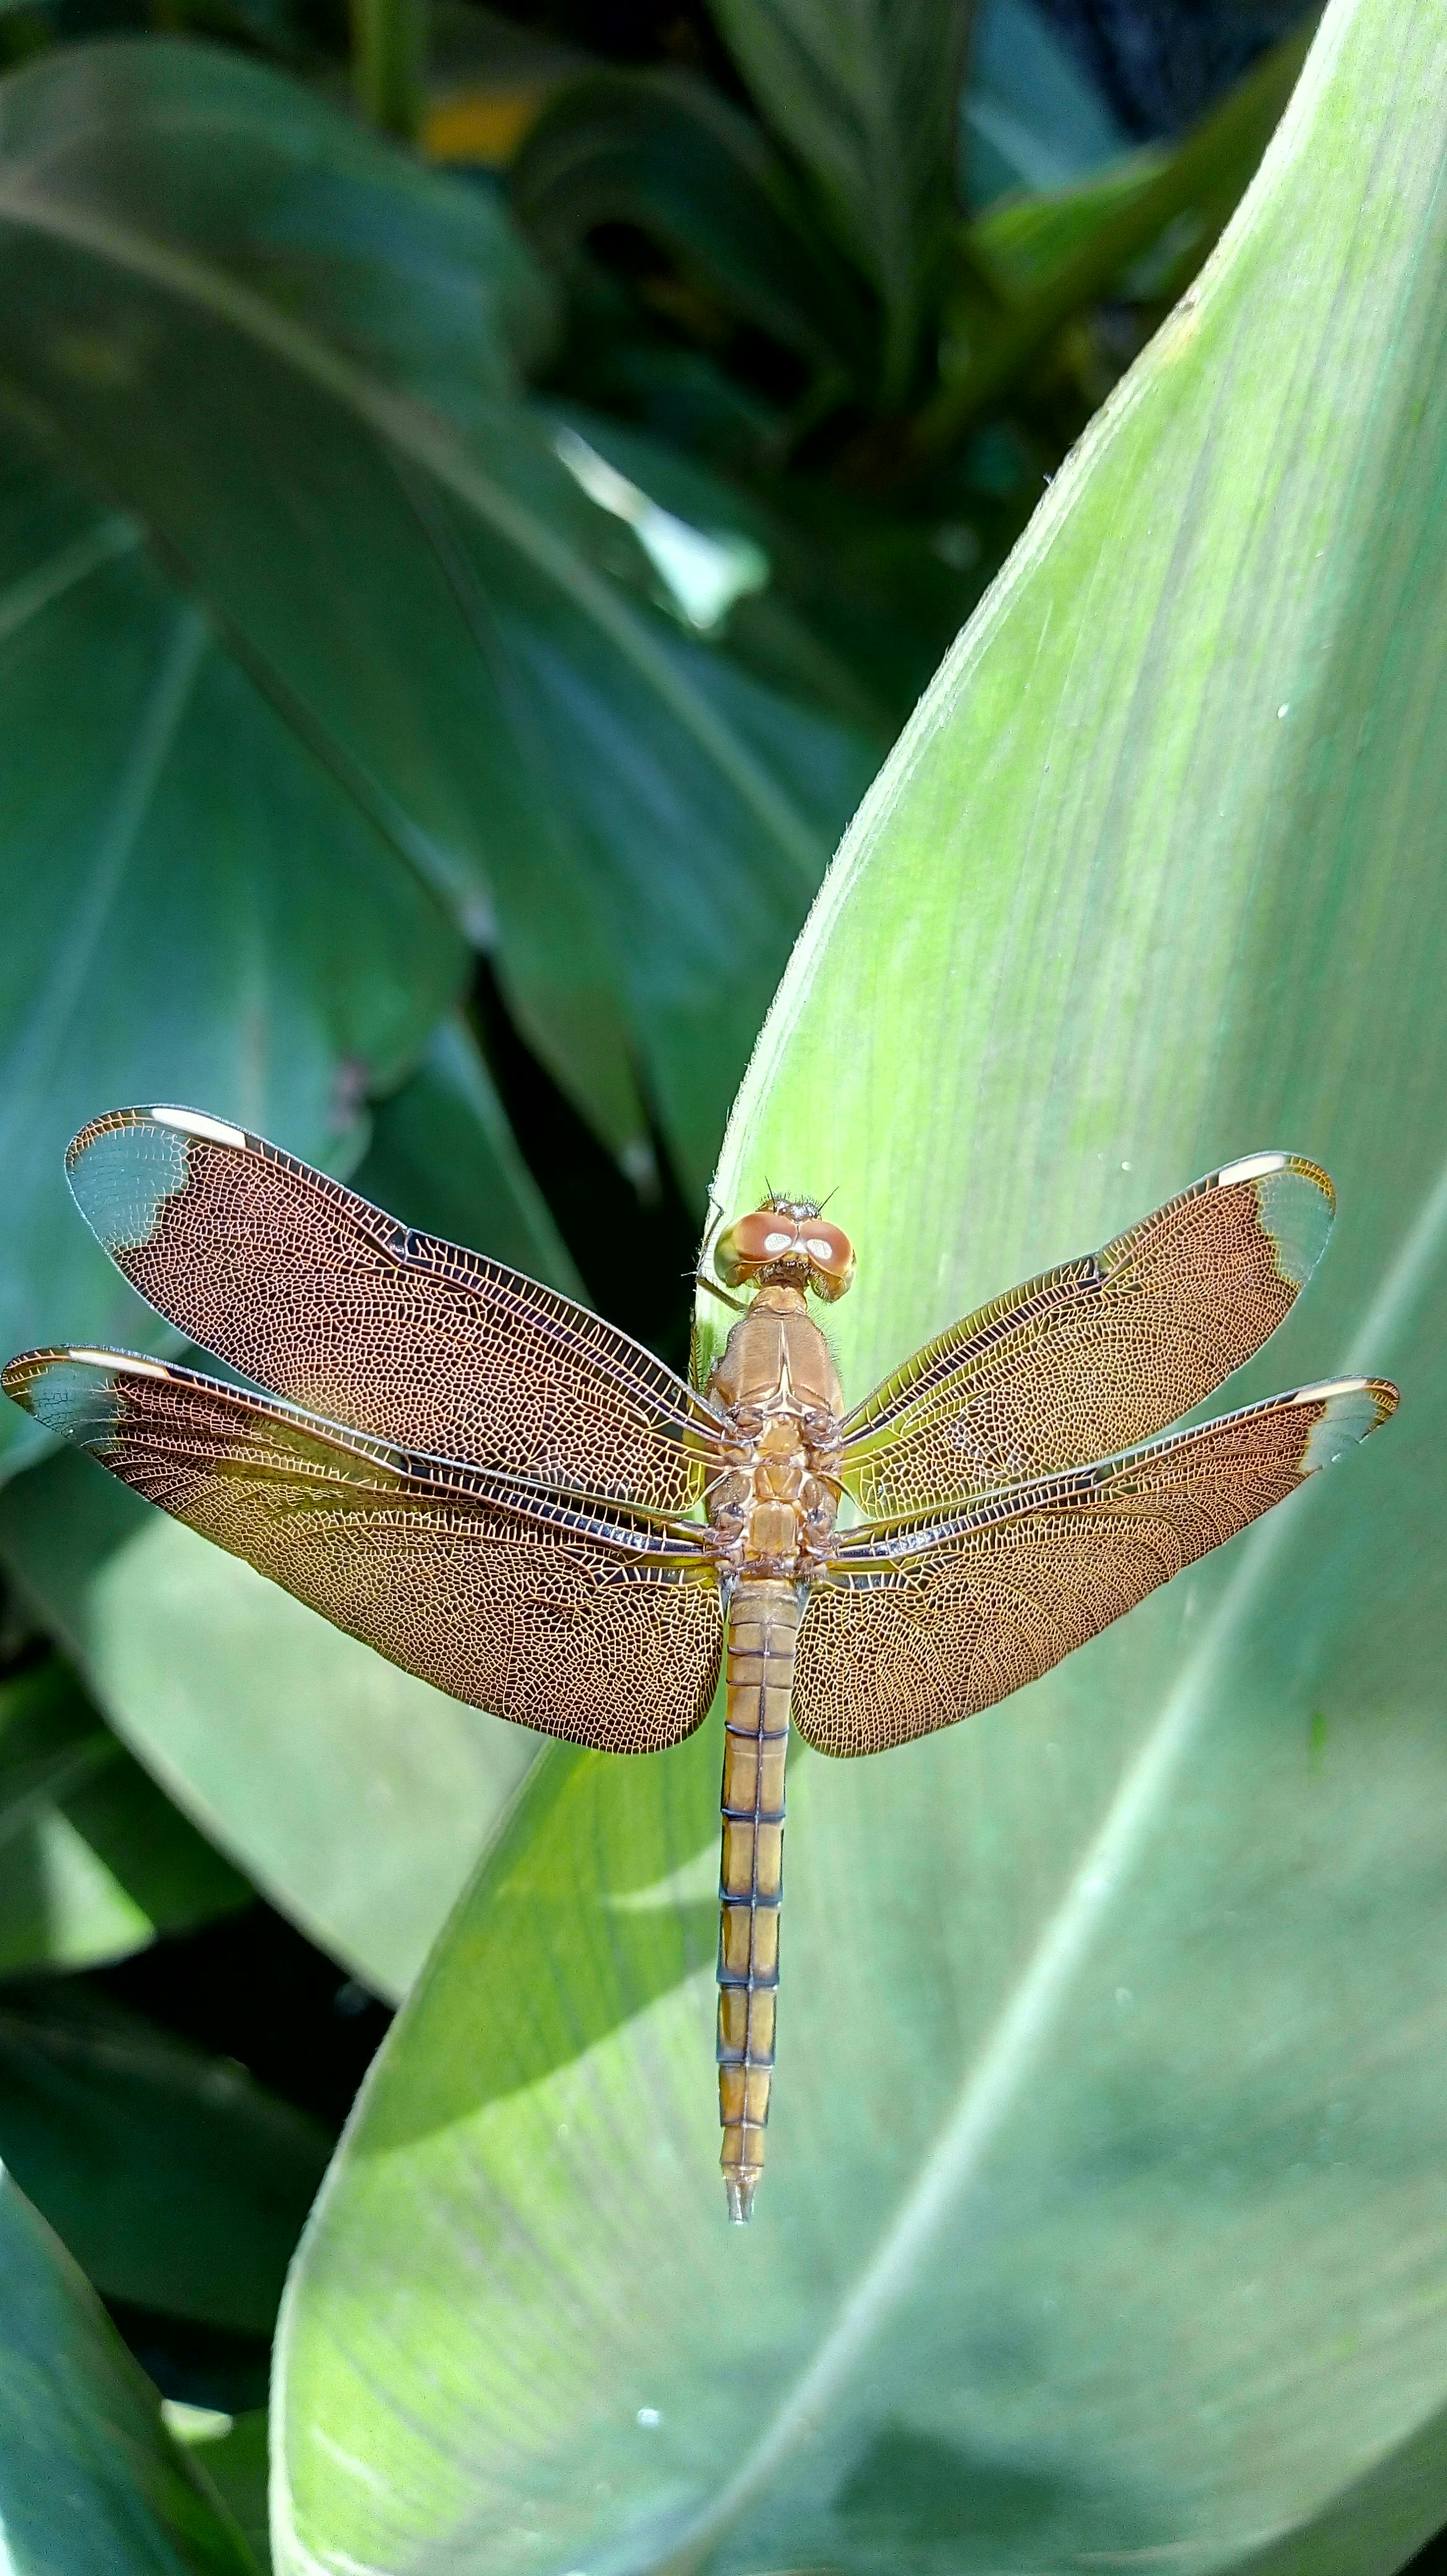 Free stock photo of dragonfly, dragonfly wing, flying dragon